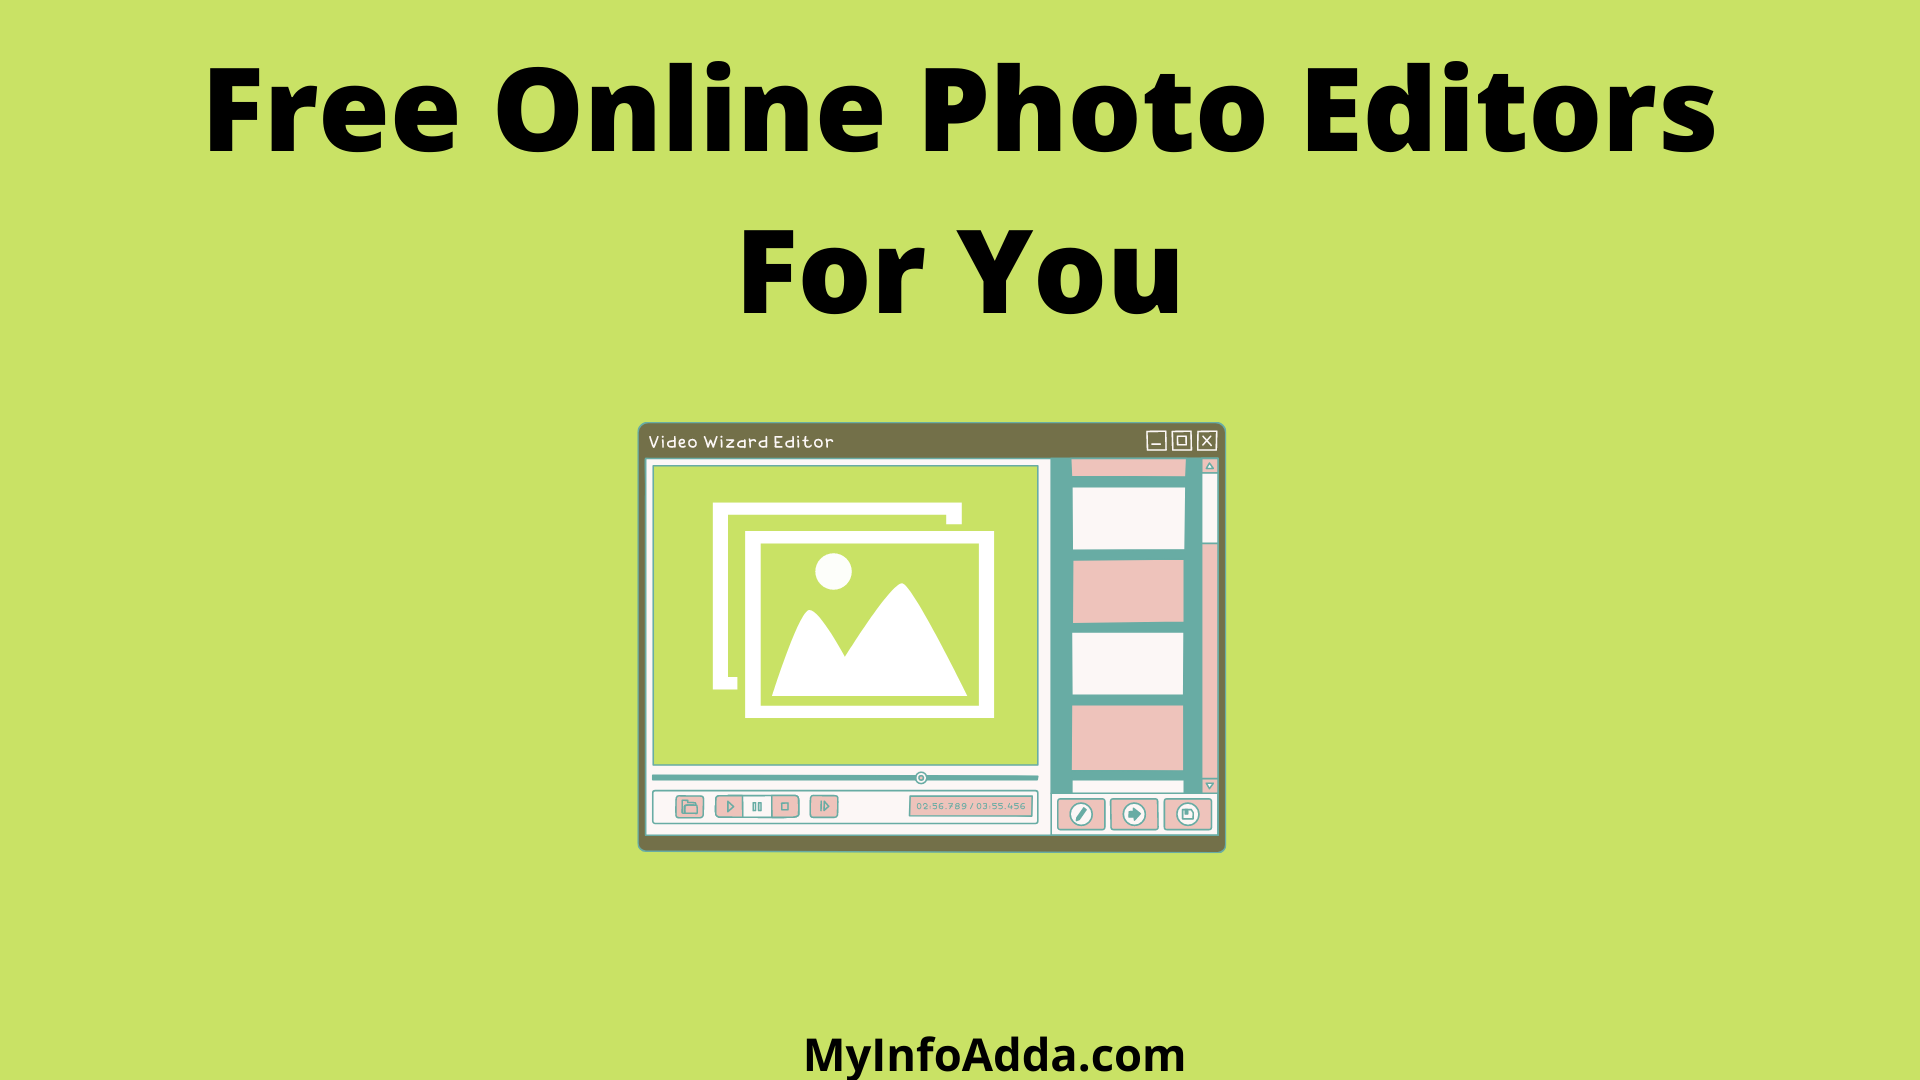 10 Free Online Photo Editors For You